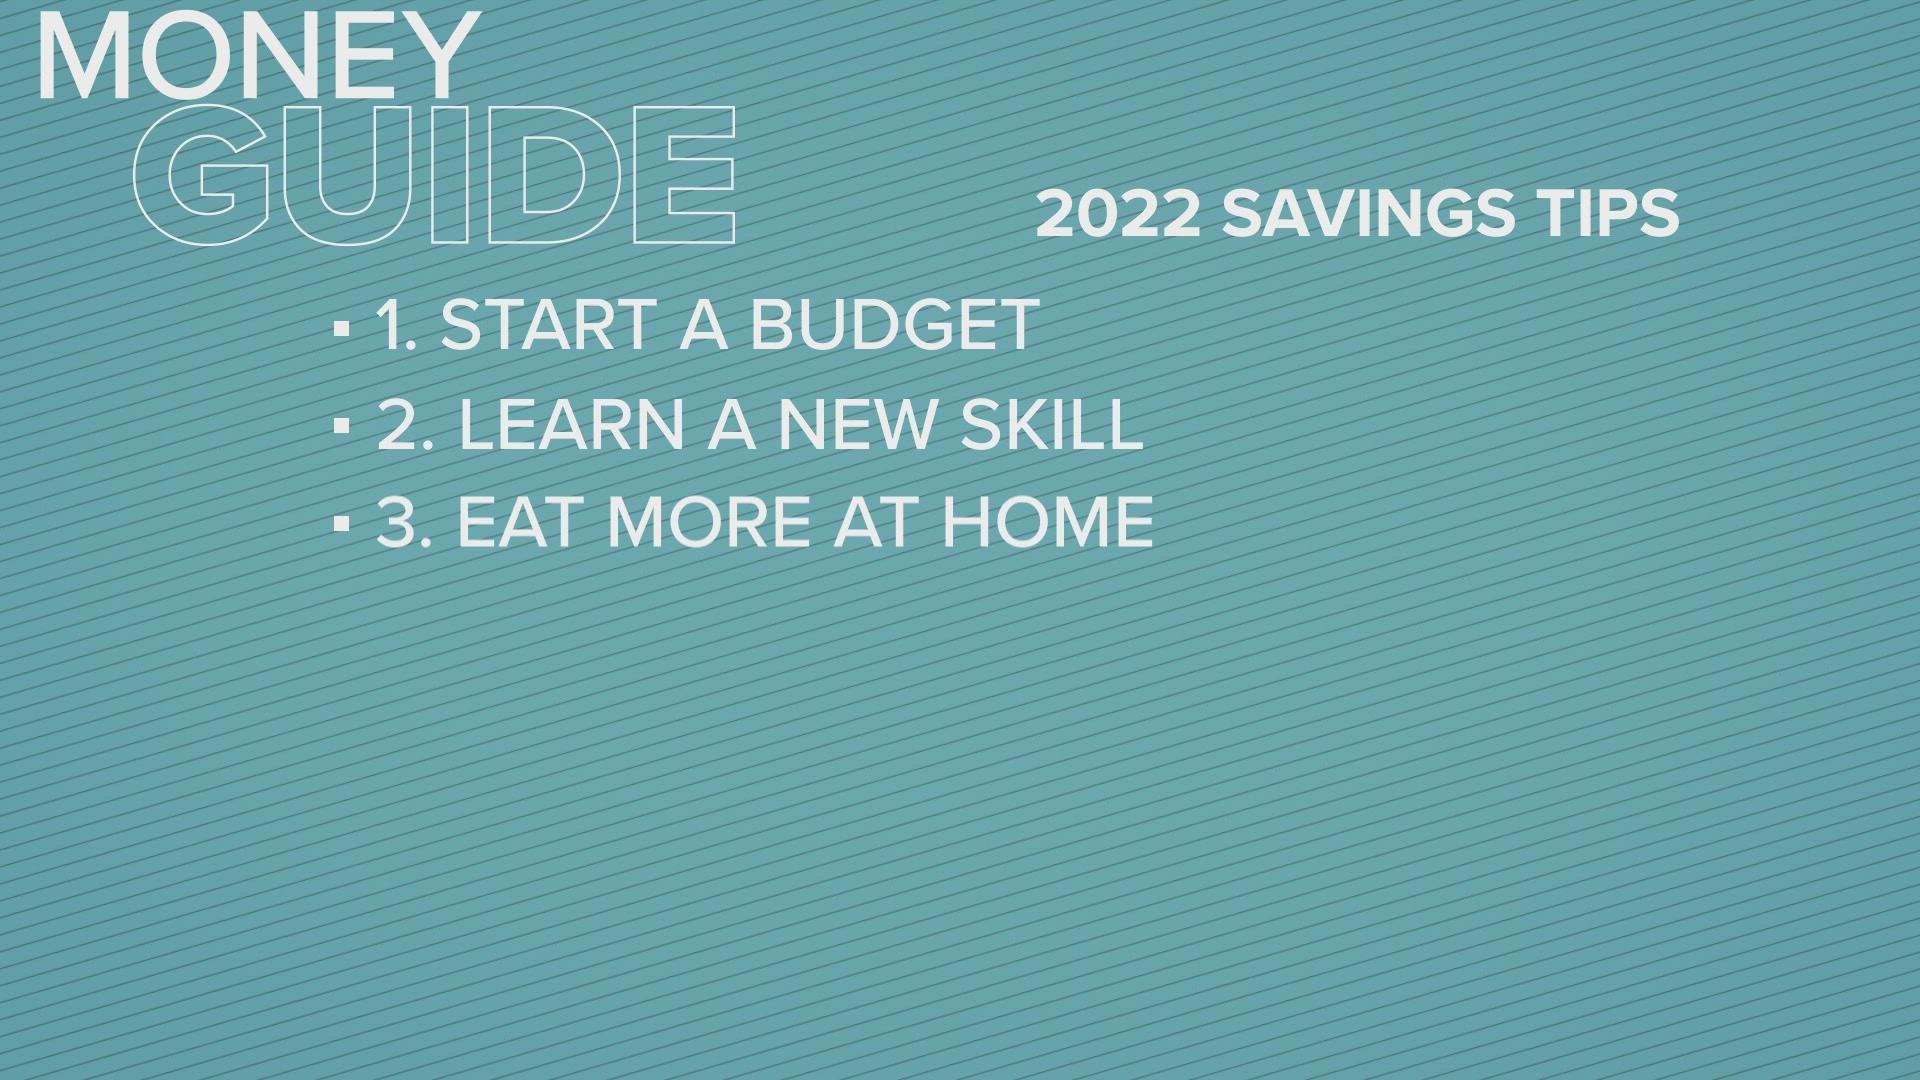 Easy resolutions you can make in 2022 that can save thousands of dollars.